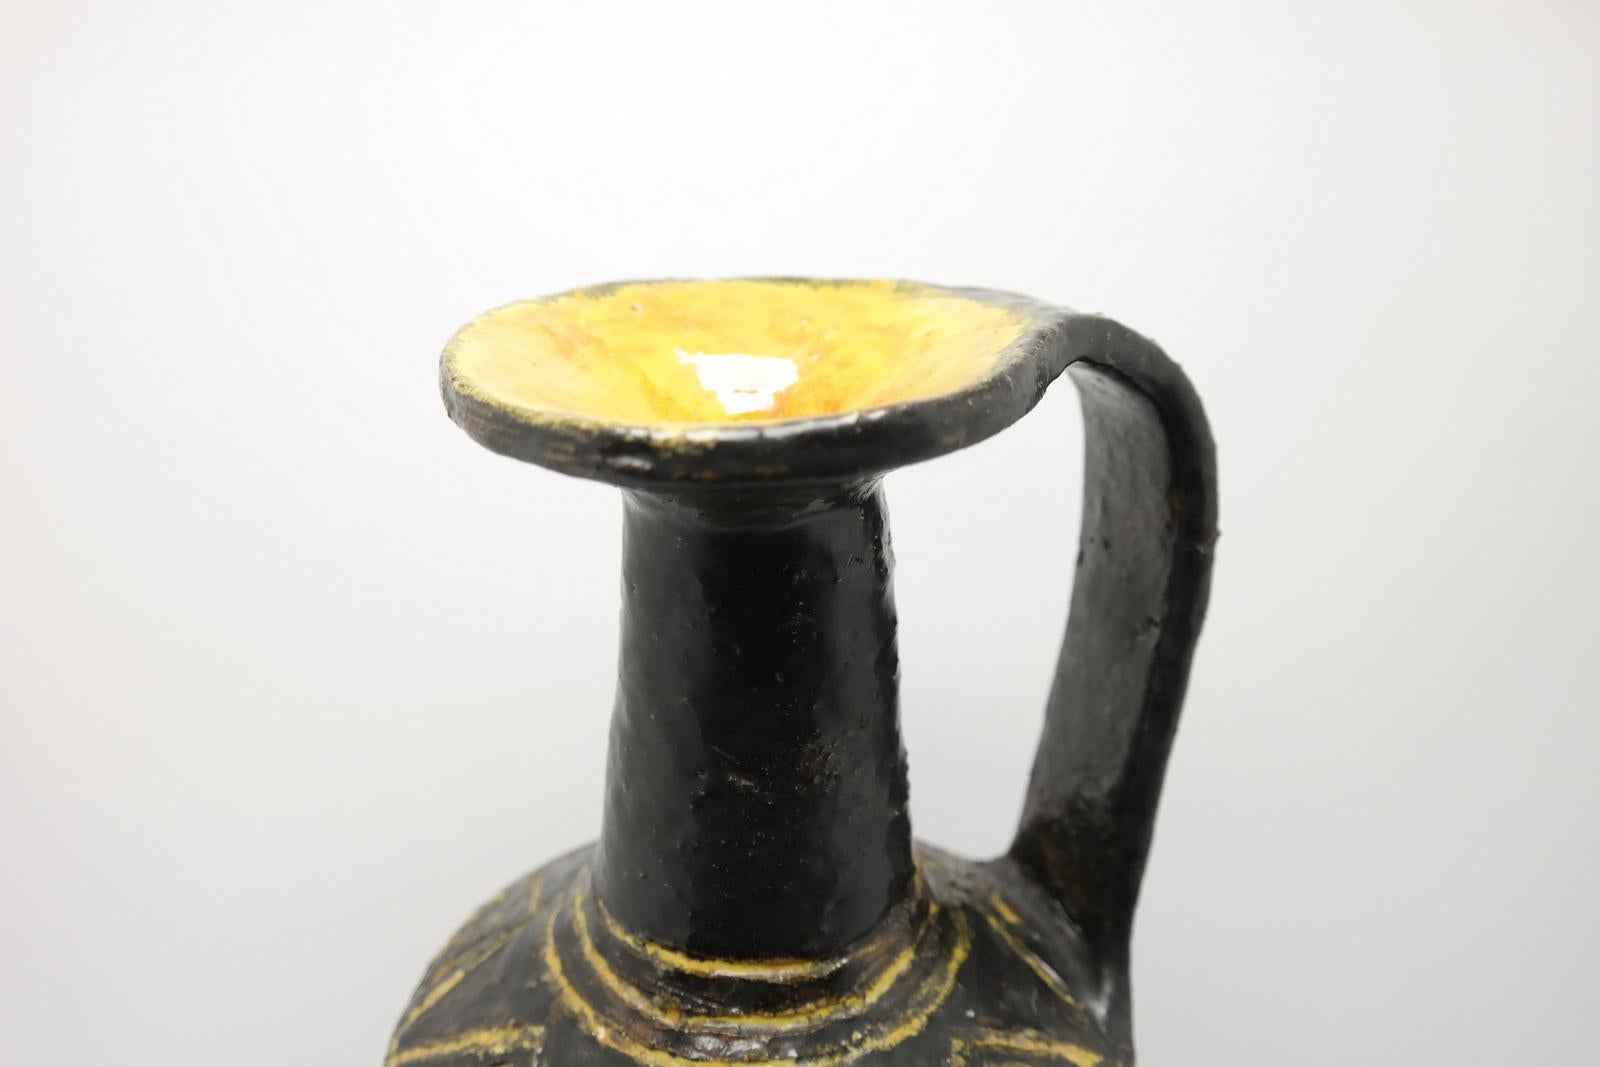 Tribal patterned, jug handle ceramic vase by Lendvay. Small chip on the side as on photos.